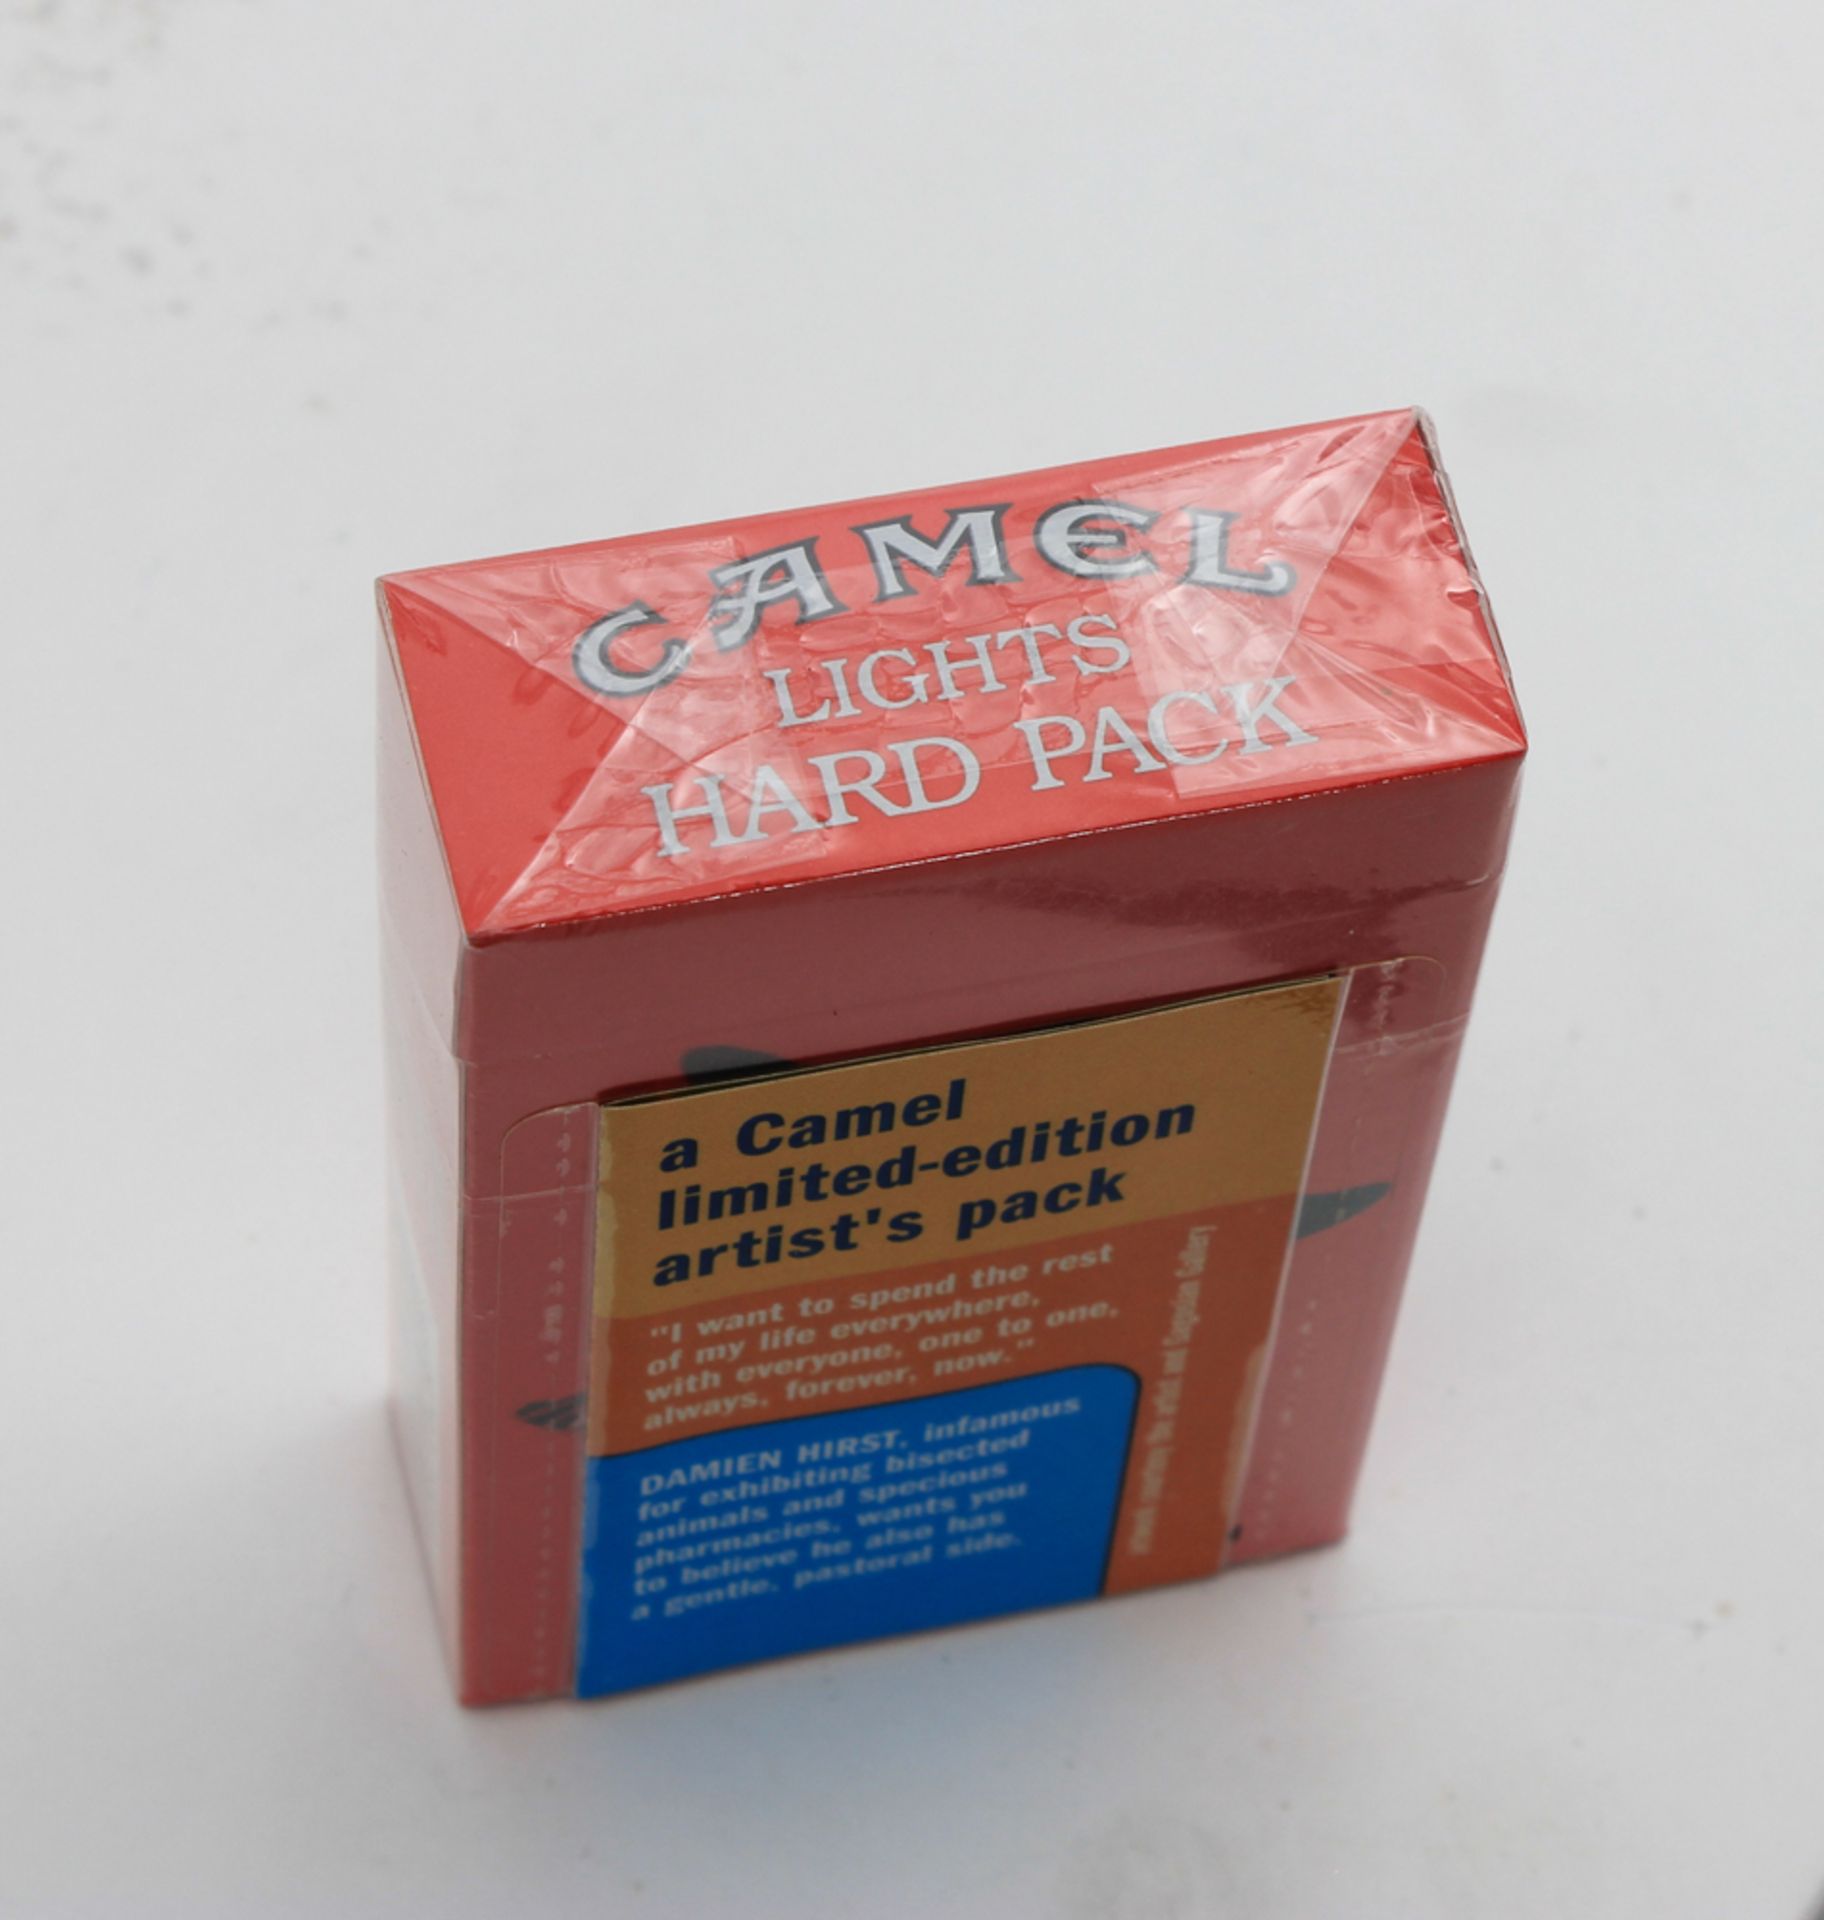 Damien Hirst (1965) Collector's item, Cigarette pack - a limited edition - Artist Pack by Damien - Image 5 of 5